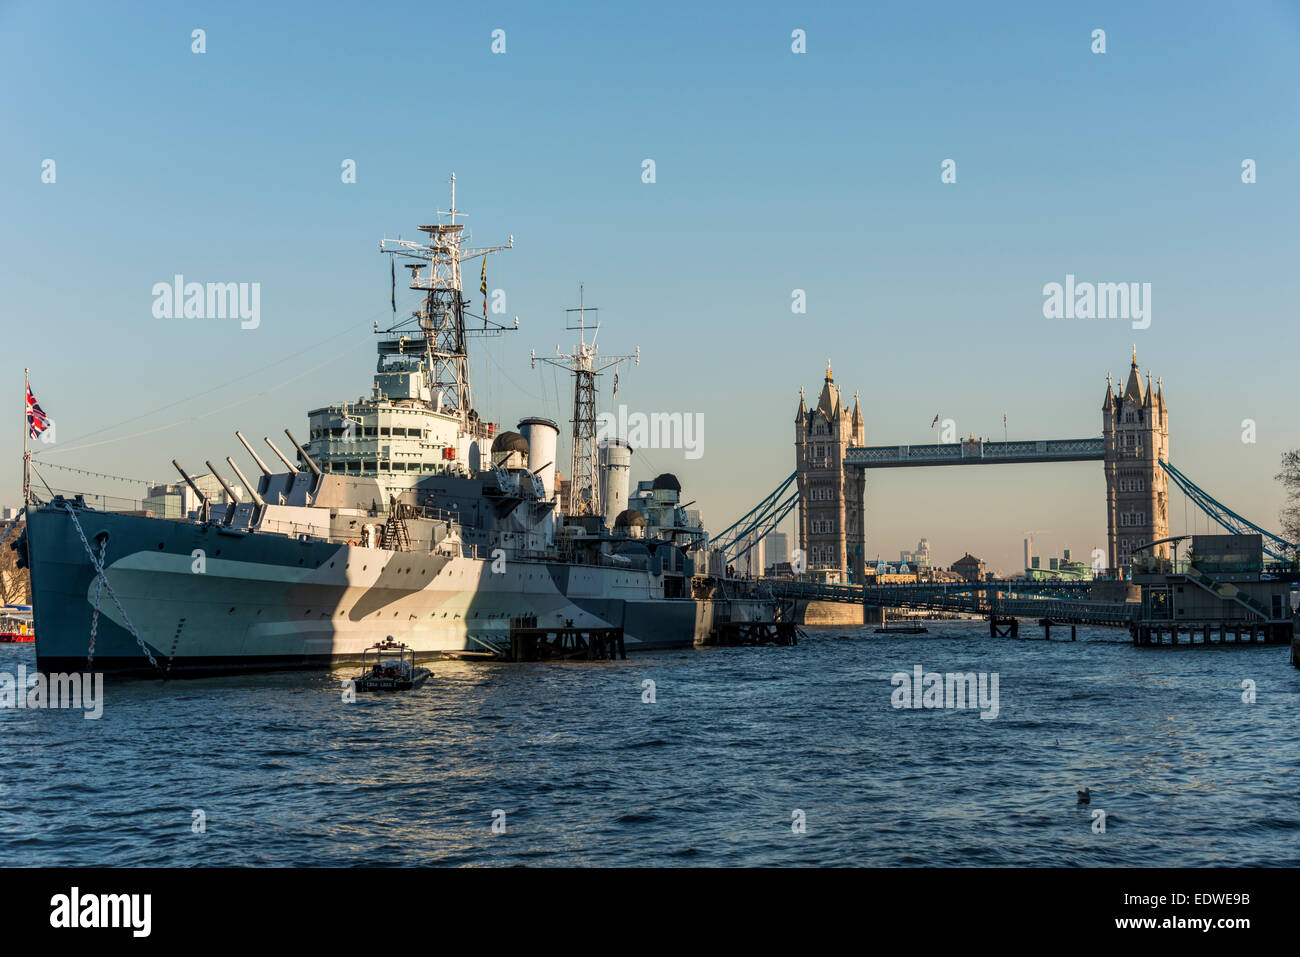 Moored by Tower Bridge, HMS Belfast is a Royal Navy light cruiser and a museum ship in London Stock Photo